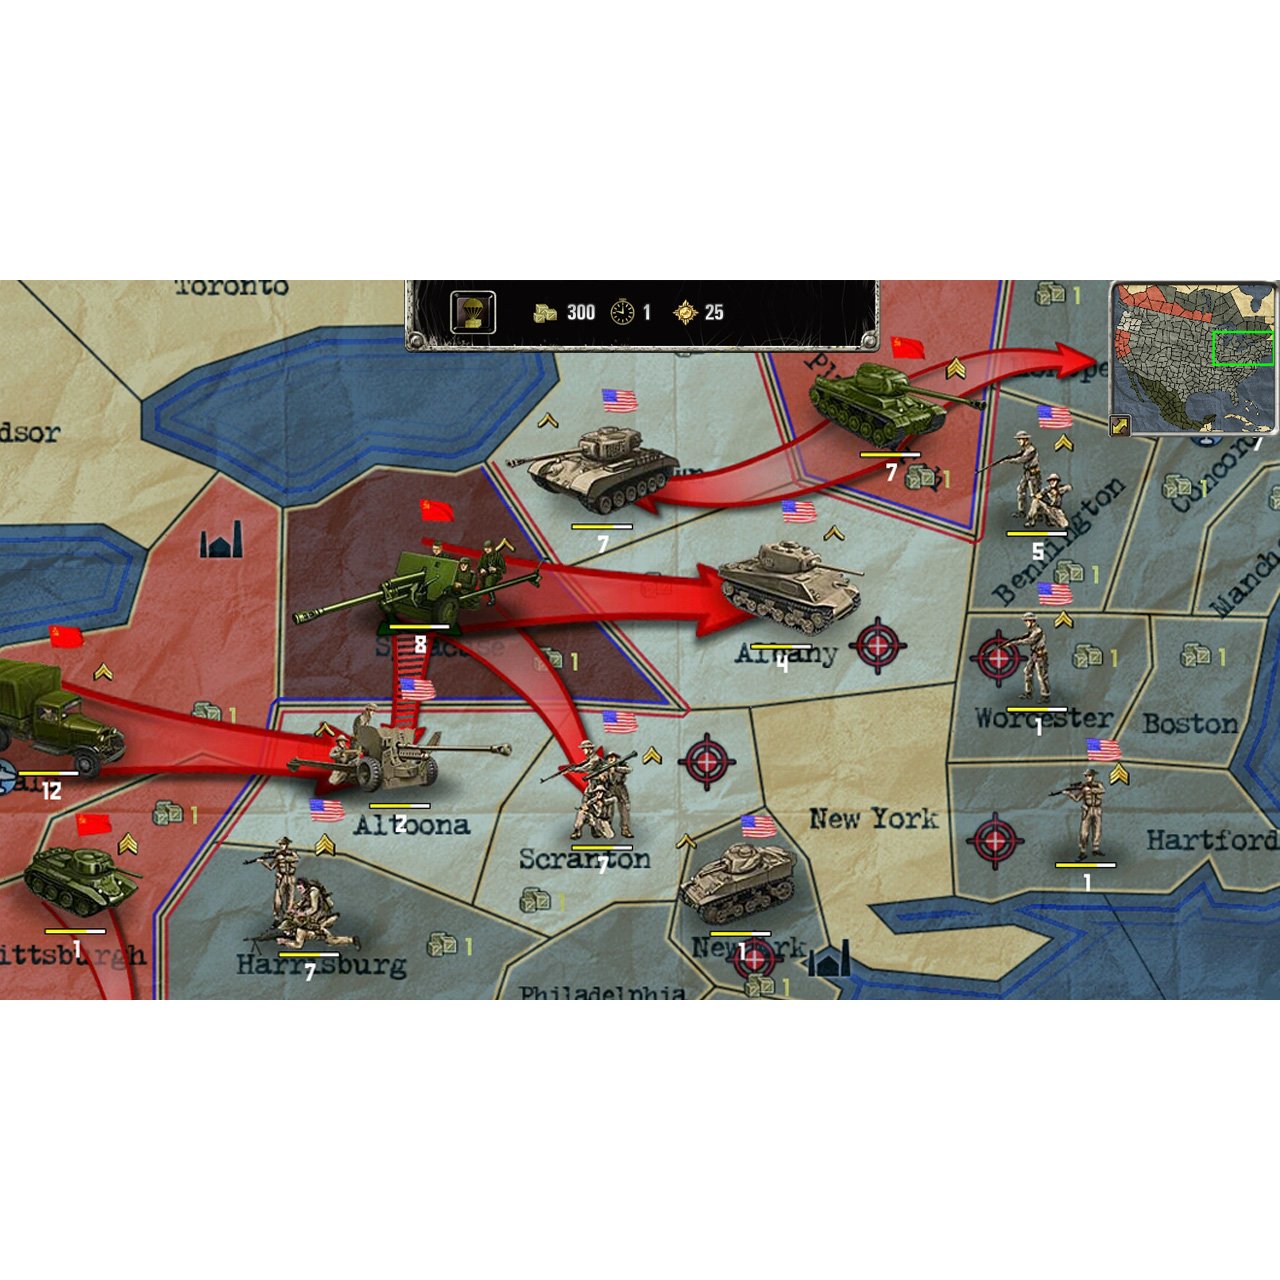 Strategy & Tactics: Wargame Collection no Steam